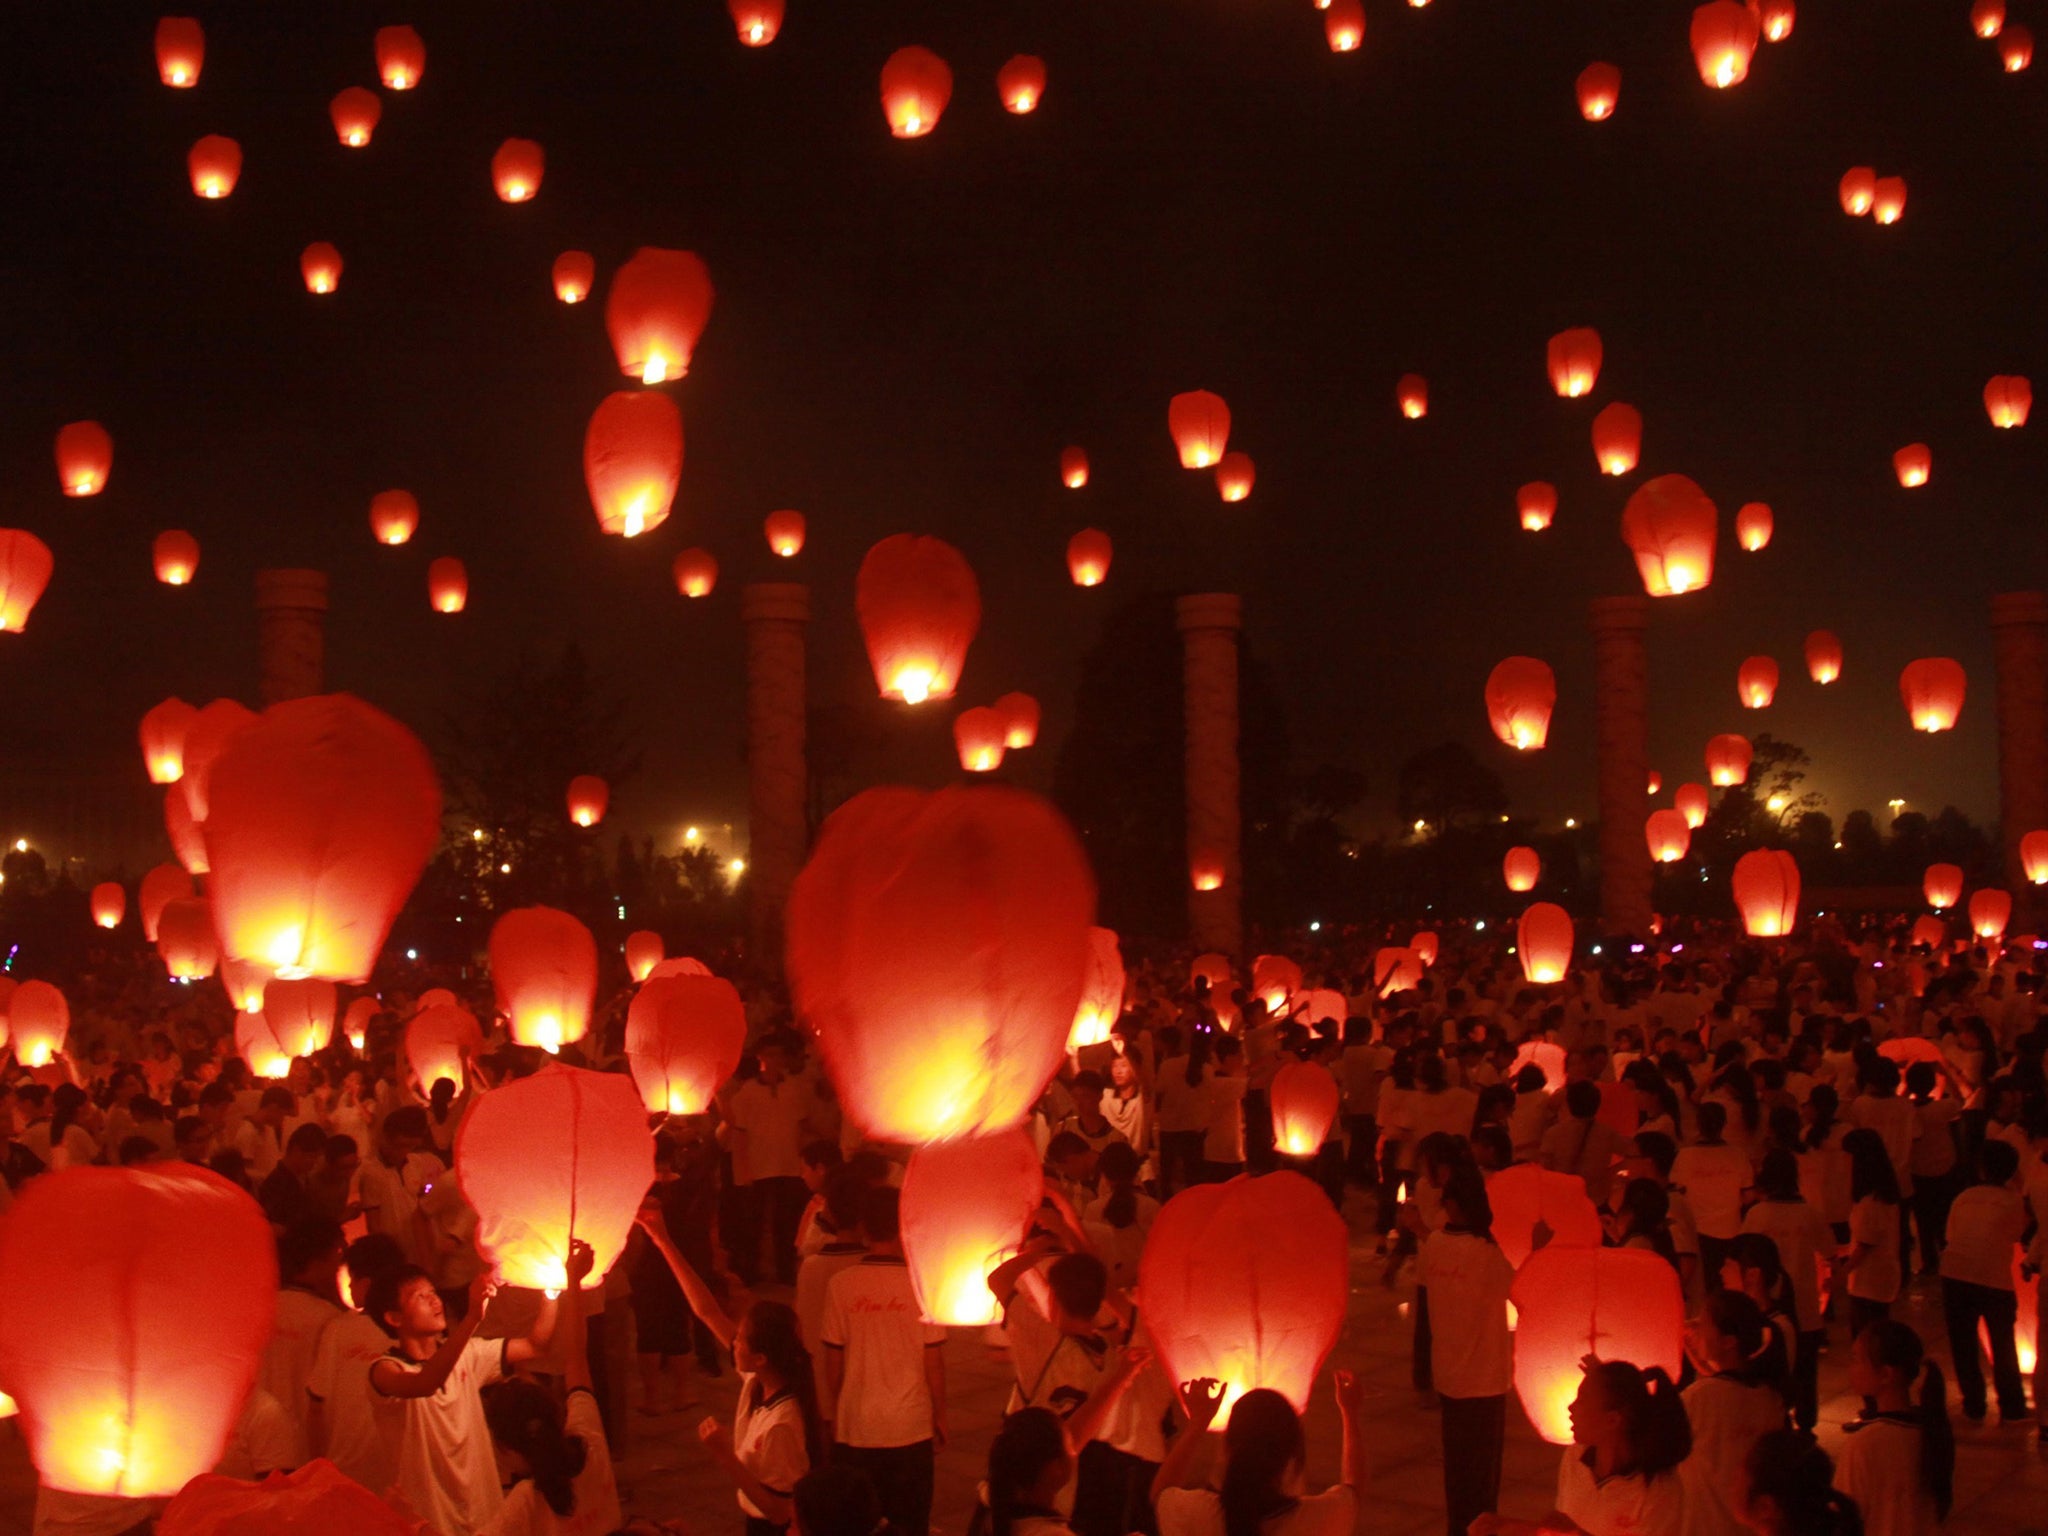 Many festival-goers will fly floating lanterns during the event in the belief it can ward off bad luck.